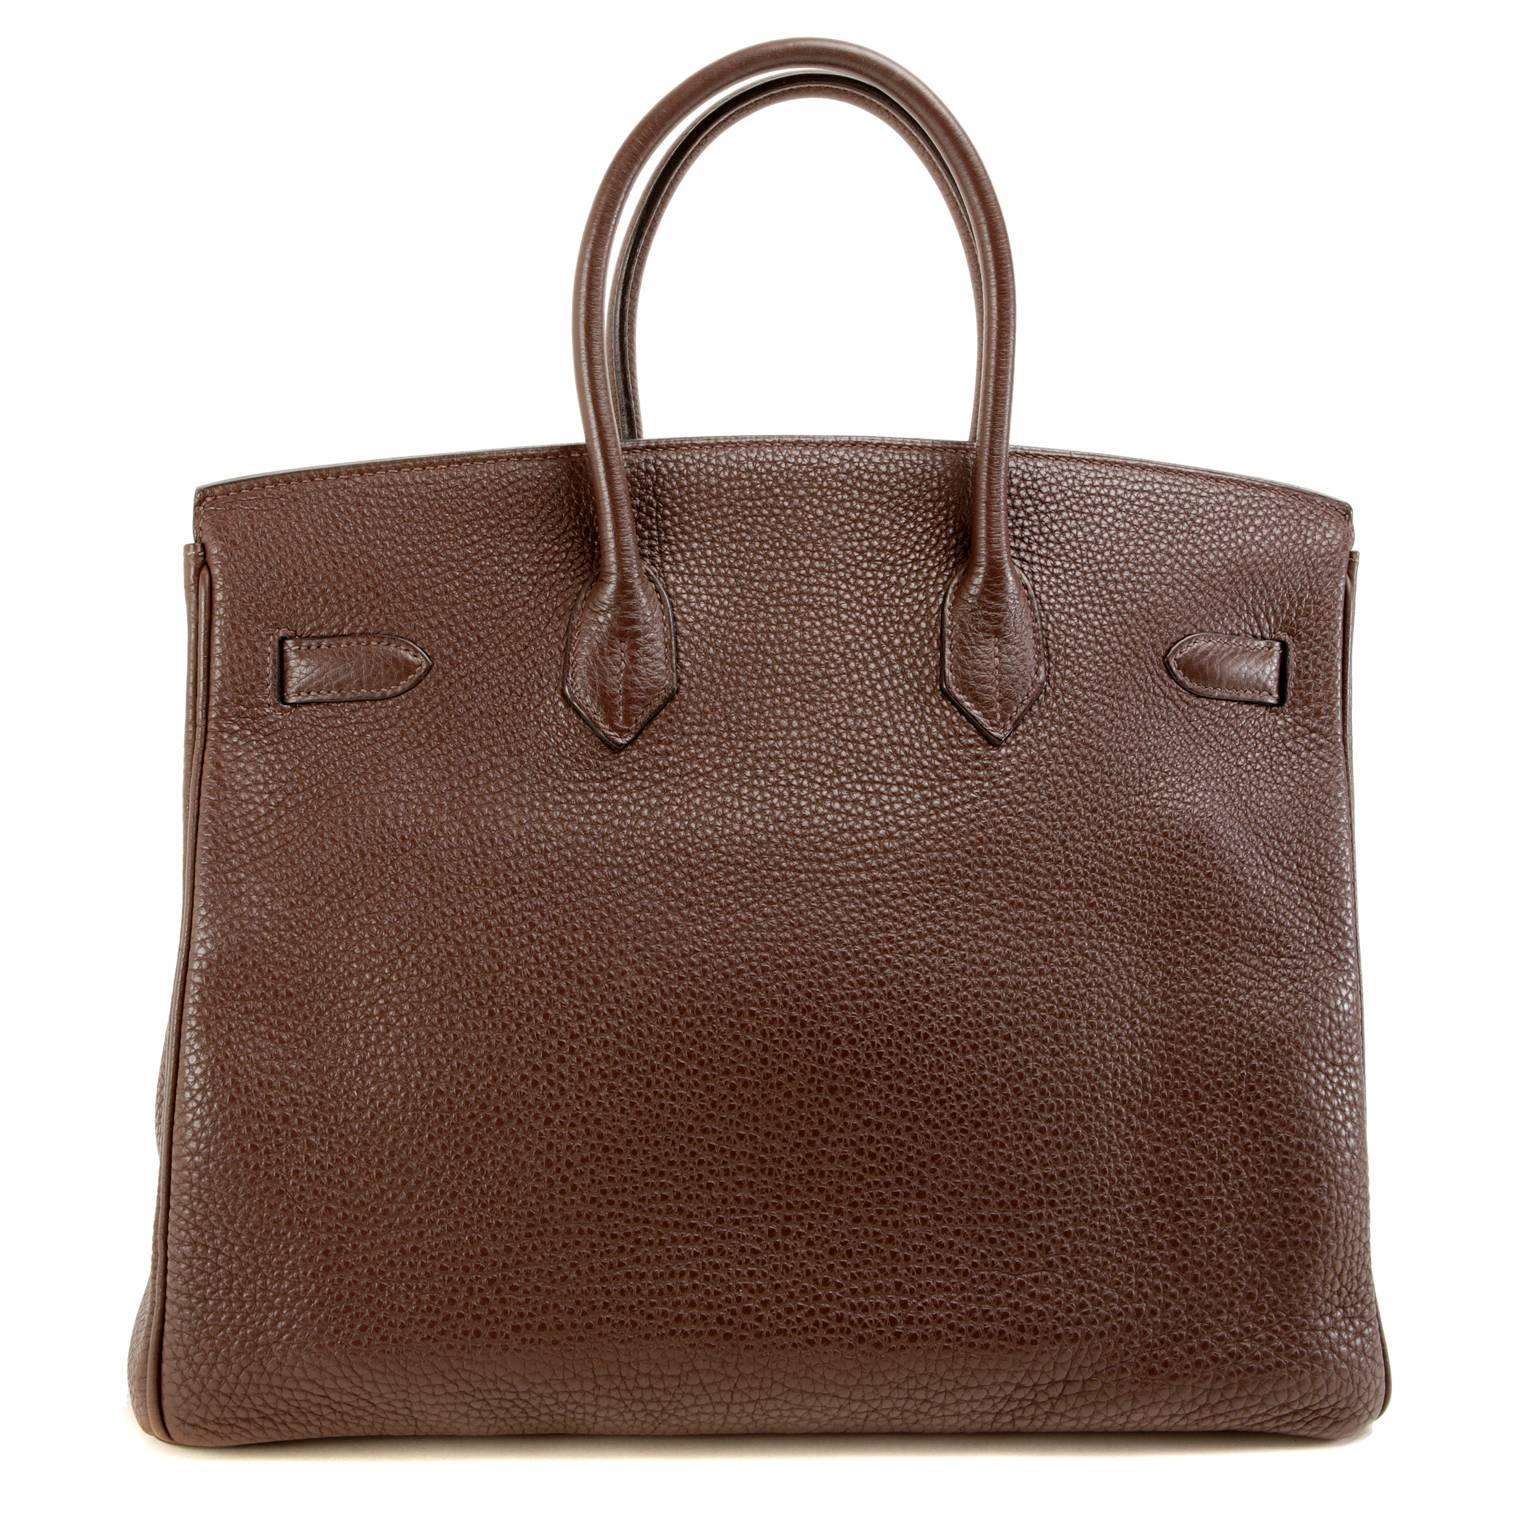 Hermès Chocolate Brown 35 cm Birkin Bag, GHW- EXCELLENT PLUS   Hermès bags are considered the ultimate luxury item the world over.  Hand stitched by skilled craftsmen, wait lists of a year or more are commonplace.  This particular Birkin is in